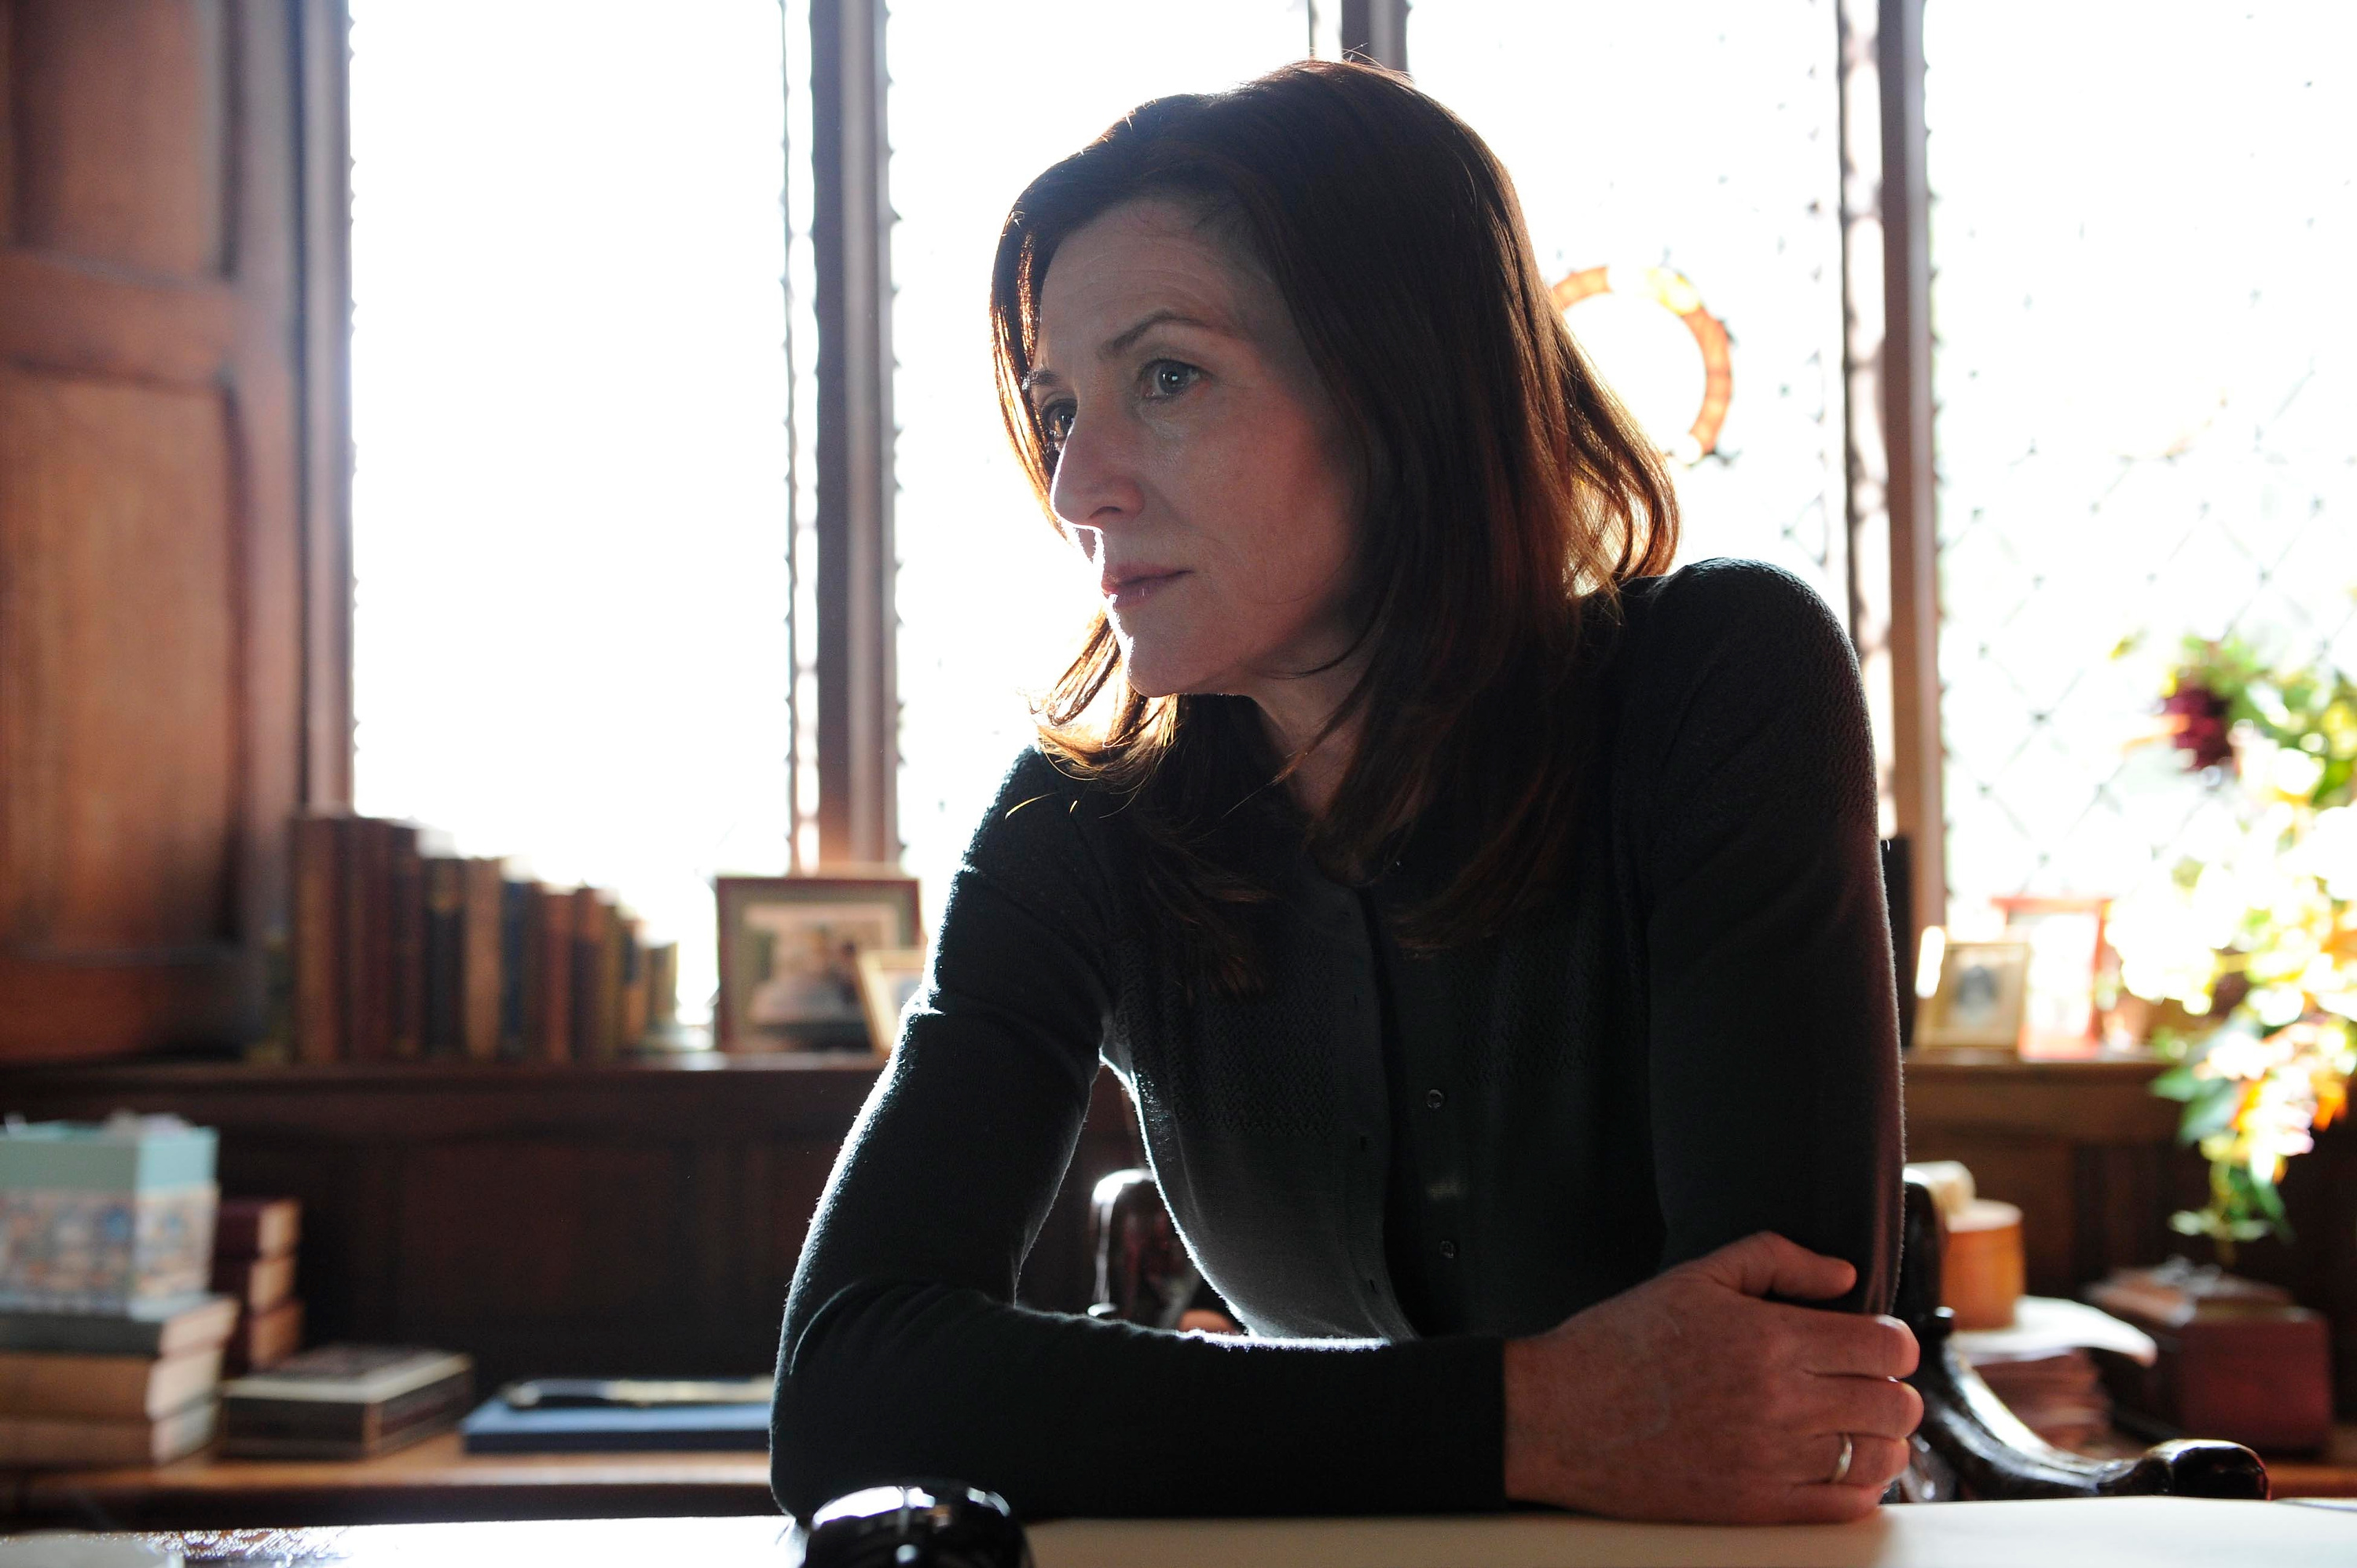 Michelle Fairley in the special, two-hour premiere episode of "24: Live Another Day." | Source: Getty Images